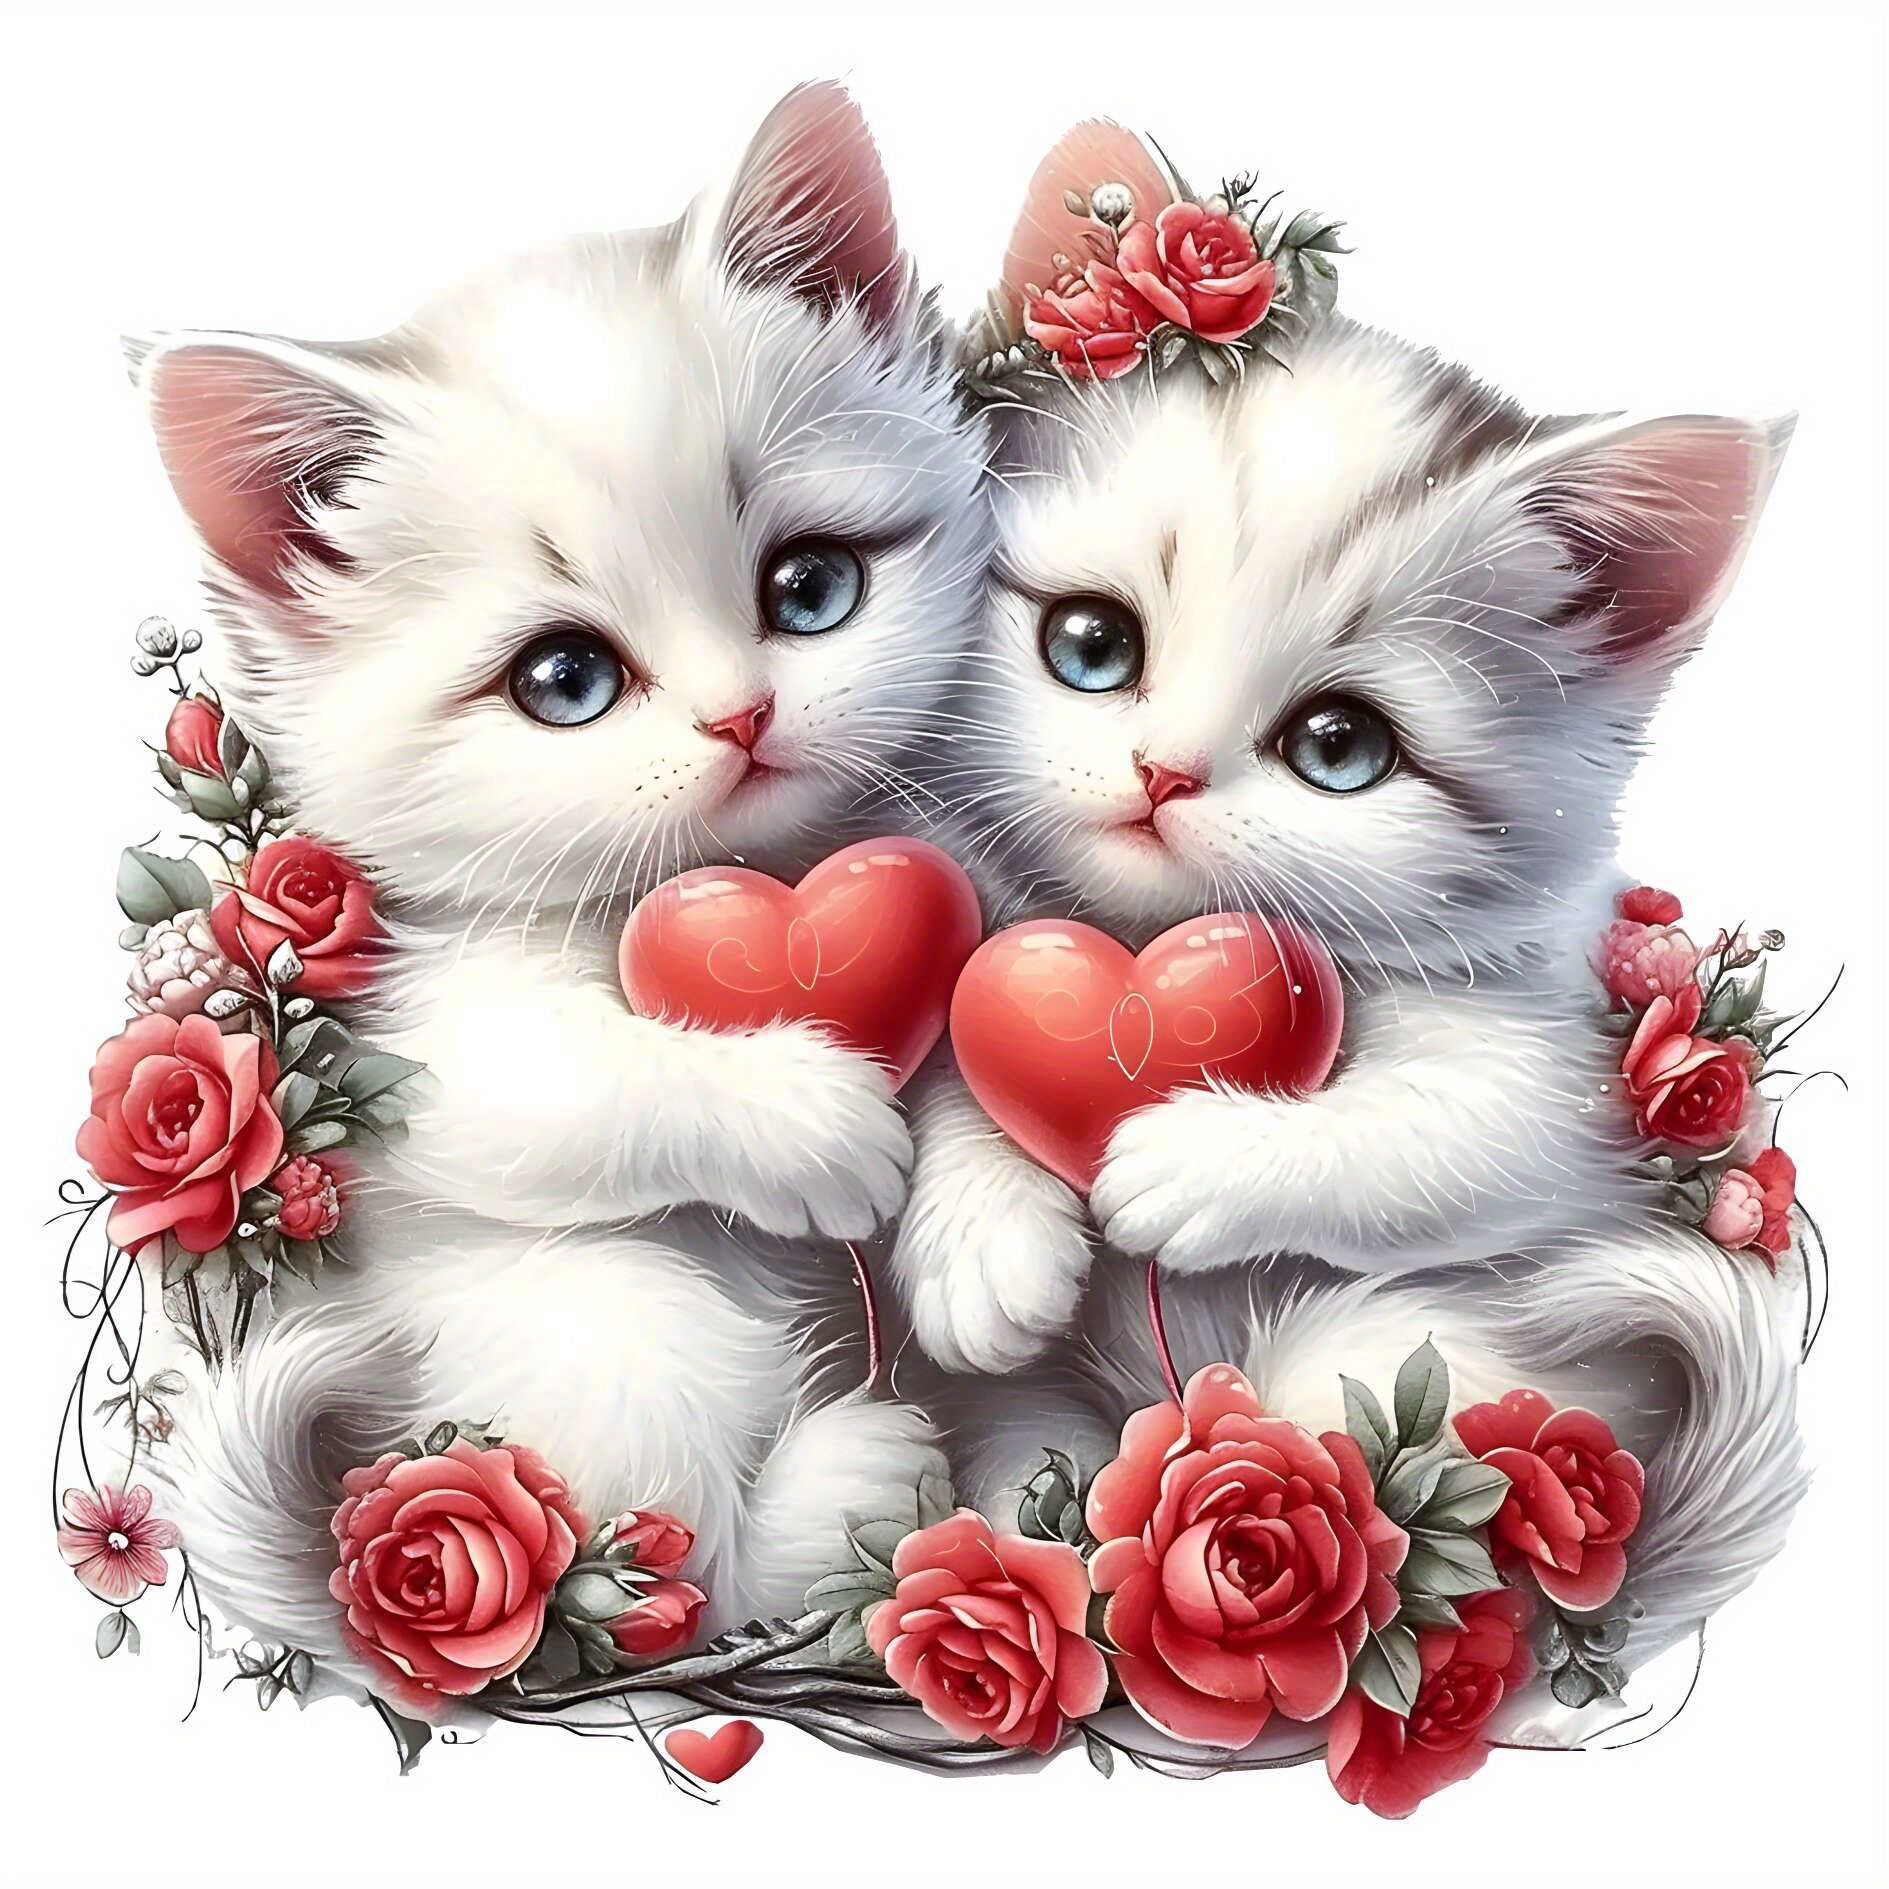 

1pc/2pcs/3pcs 2 White Kittens Holding A Red Love Heart Heat Transfer Stickers For Men, Suitable For T-shirts, Clothes, Pillows, Bags And Jeans